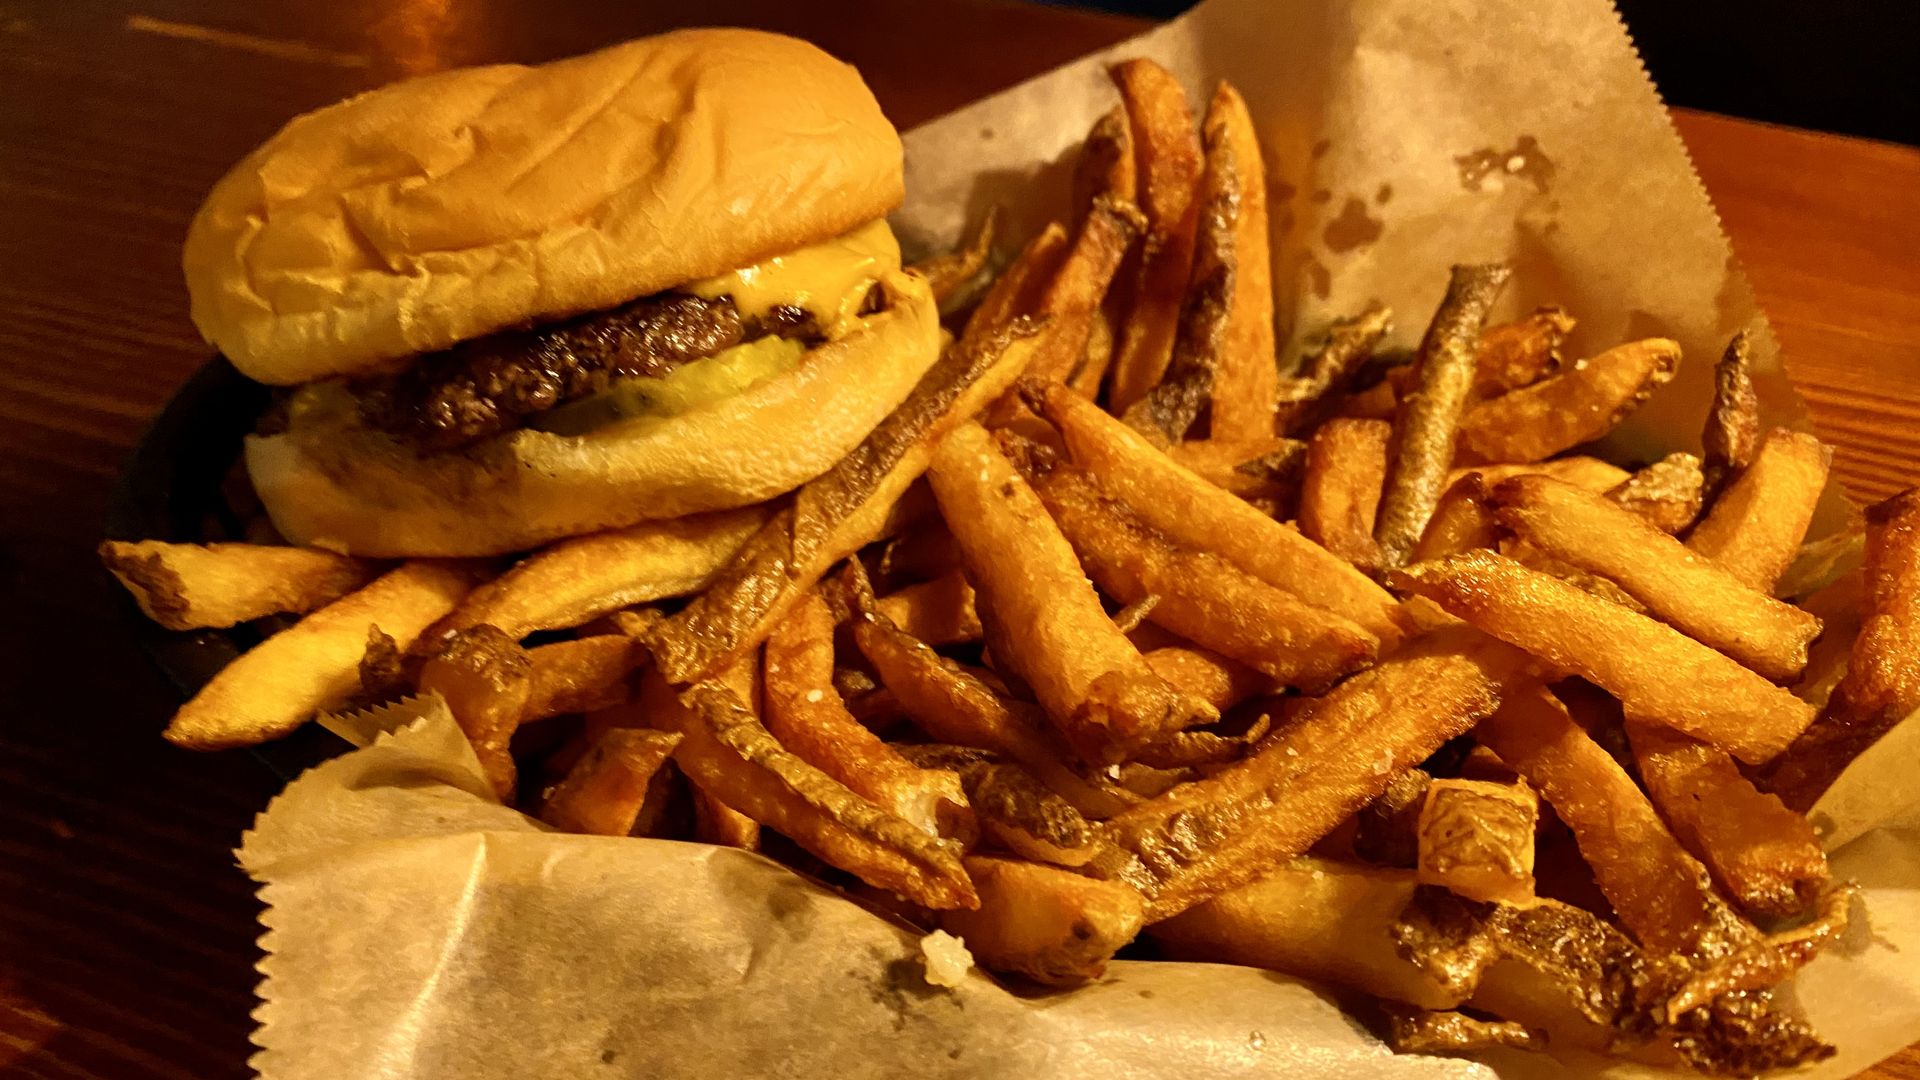 A burger resting on the corner of a basket of fries.